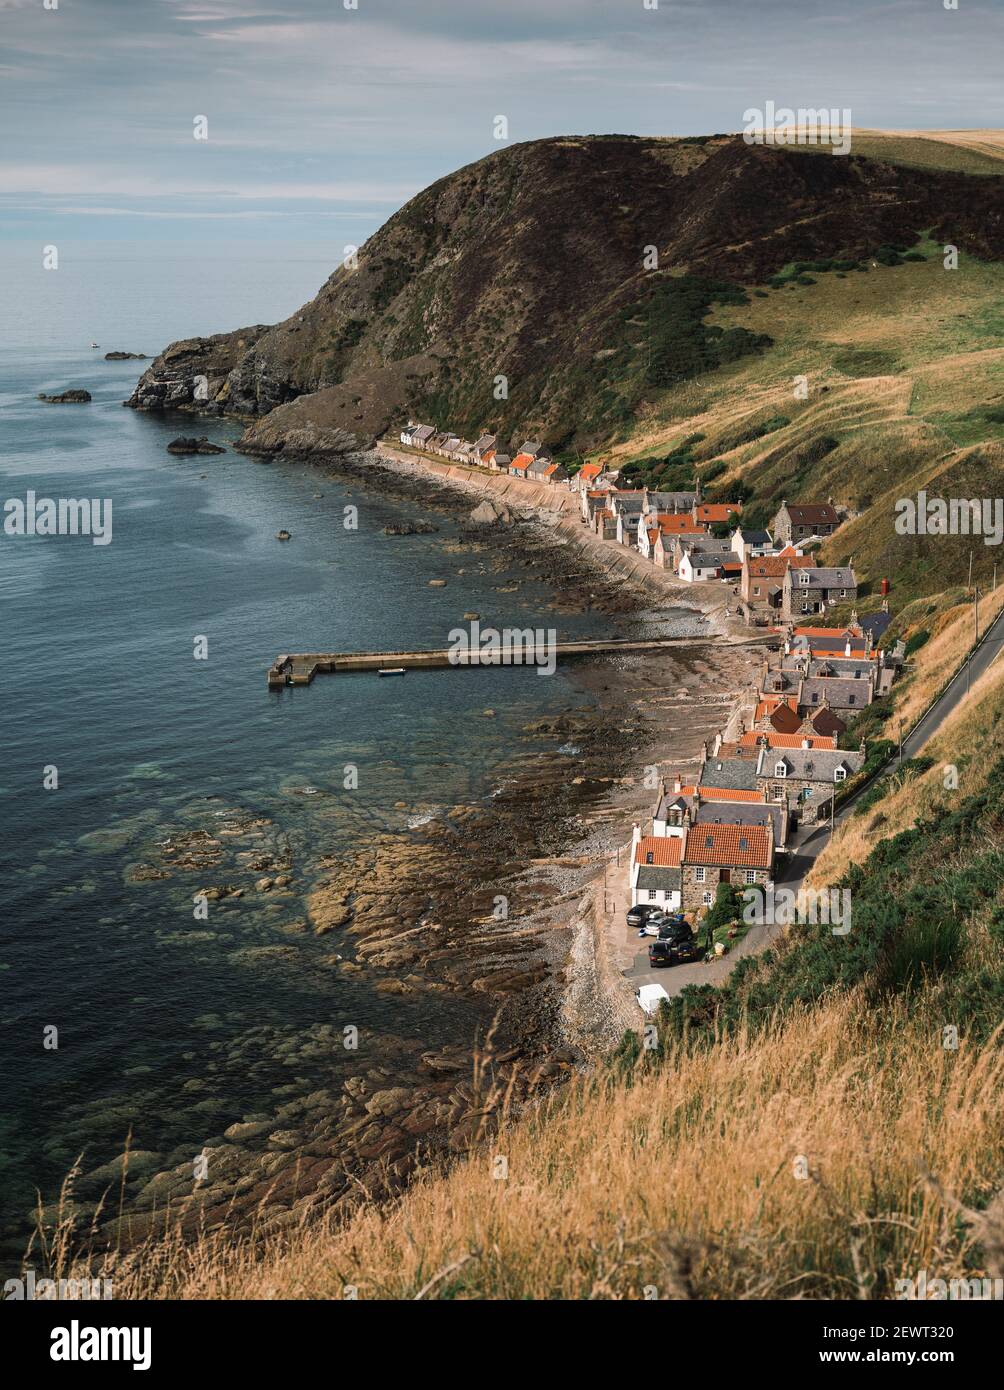 Looking down onto the small fishing village of Crovie on the northern coast of Aberdeenshire, Scotland, UK Stock Photo